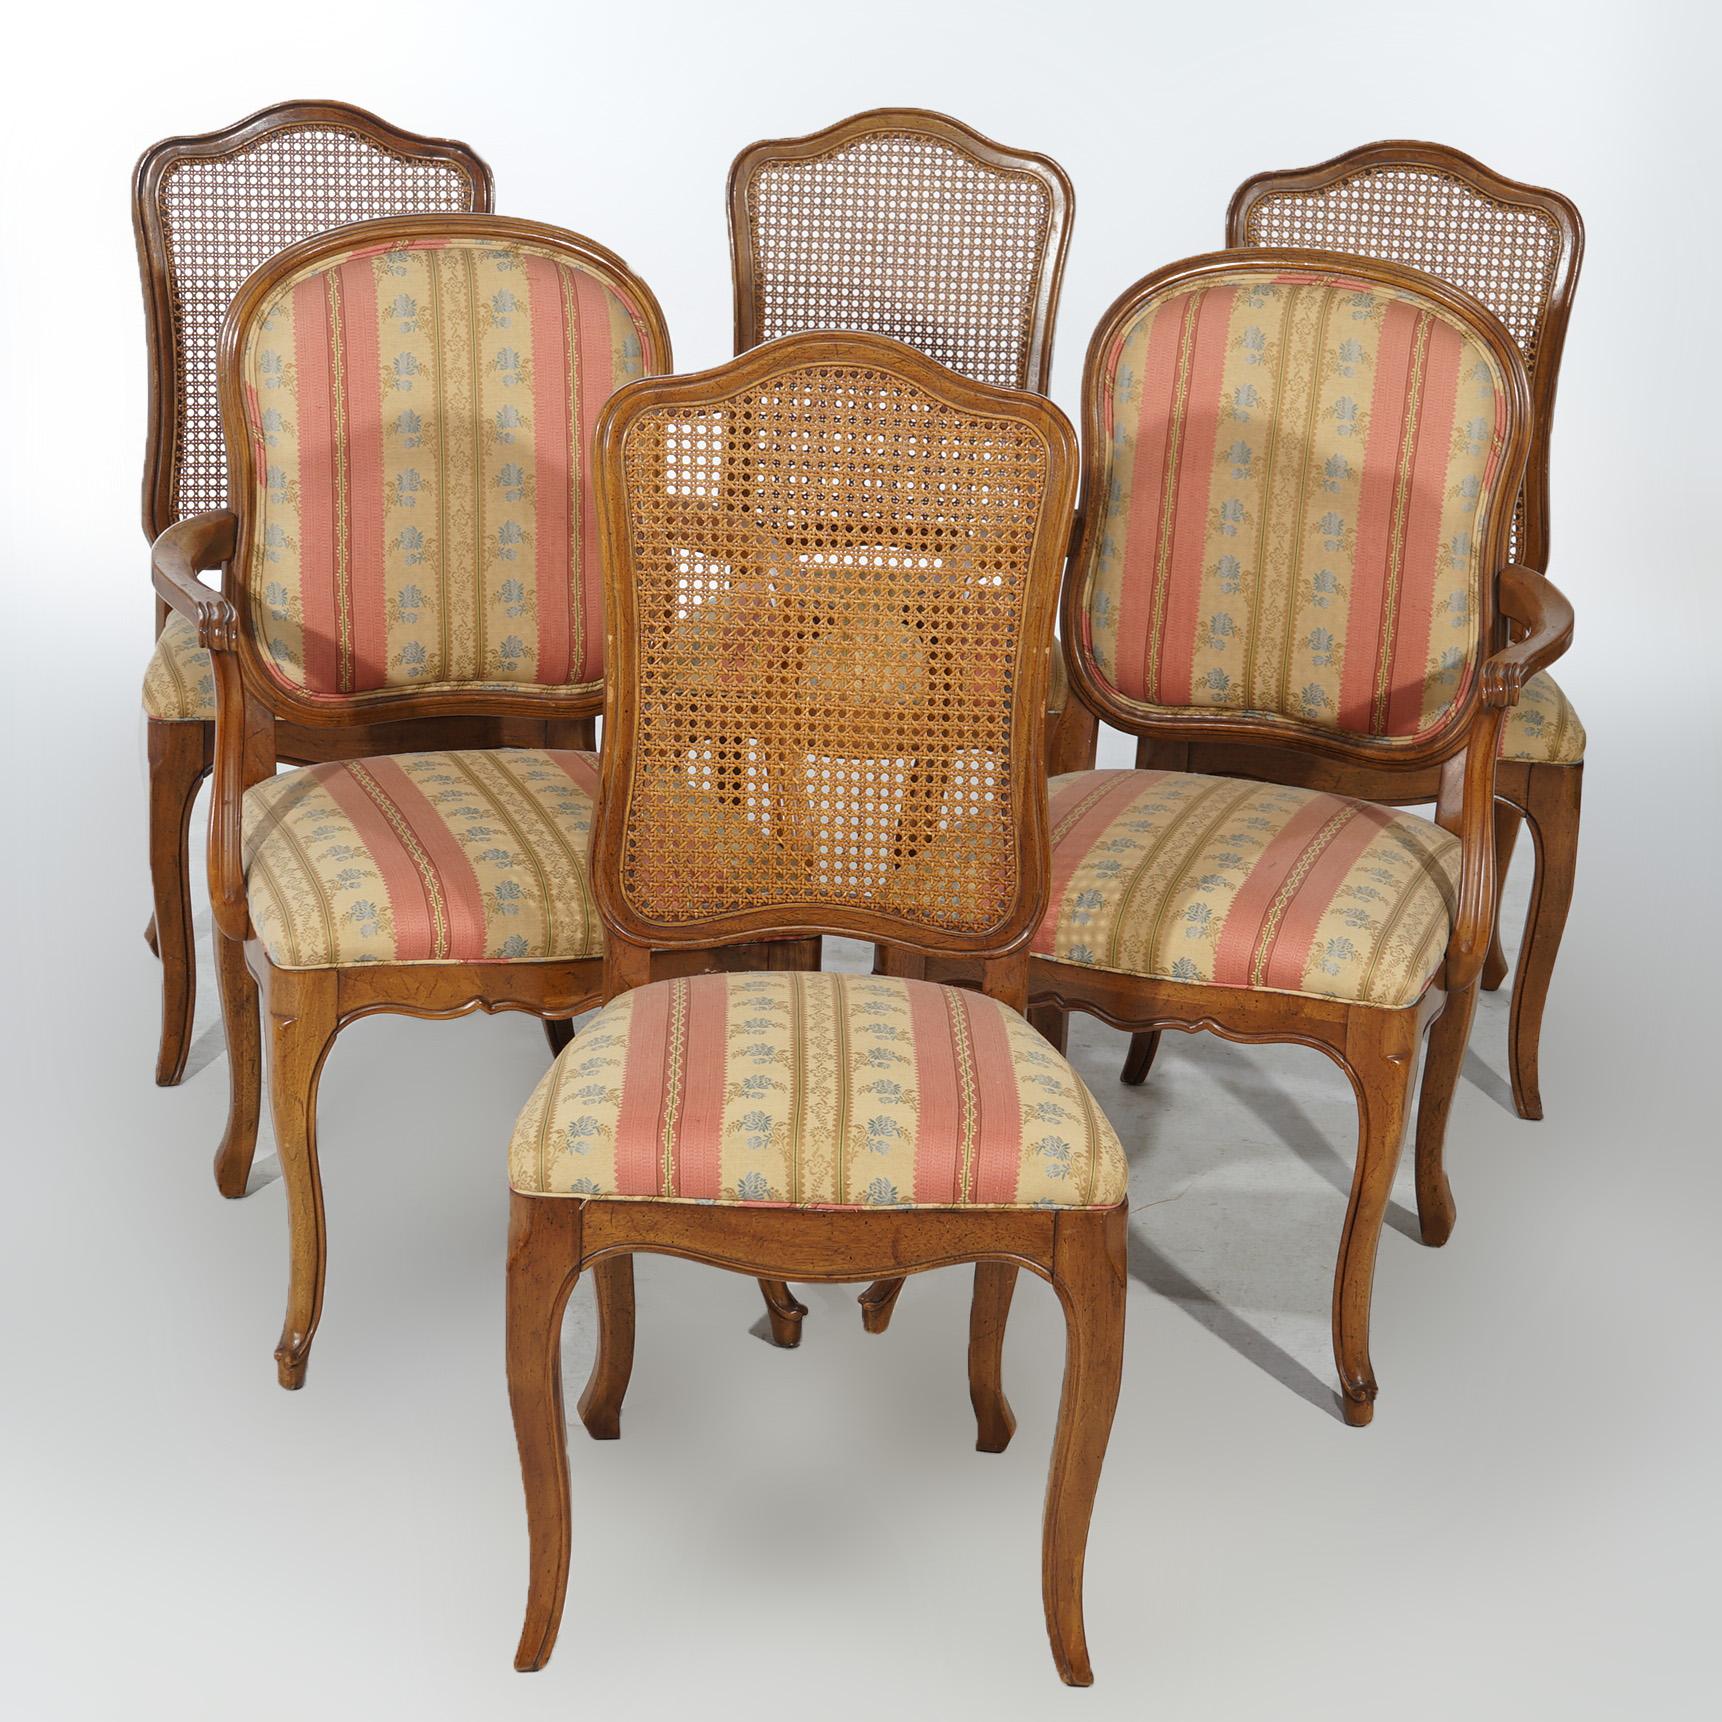 Six French Louis XIV Style Mahogany & Cane Dining Chairs 20th C For Sale 1